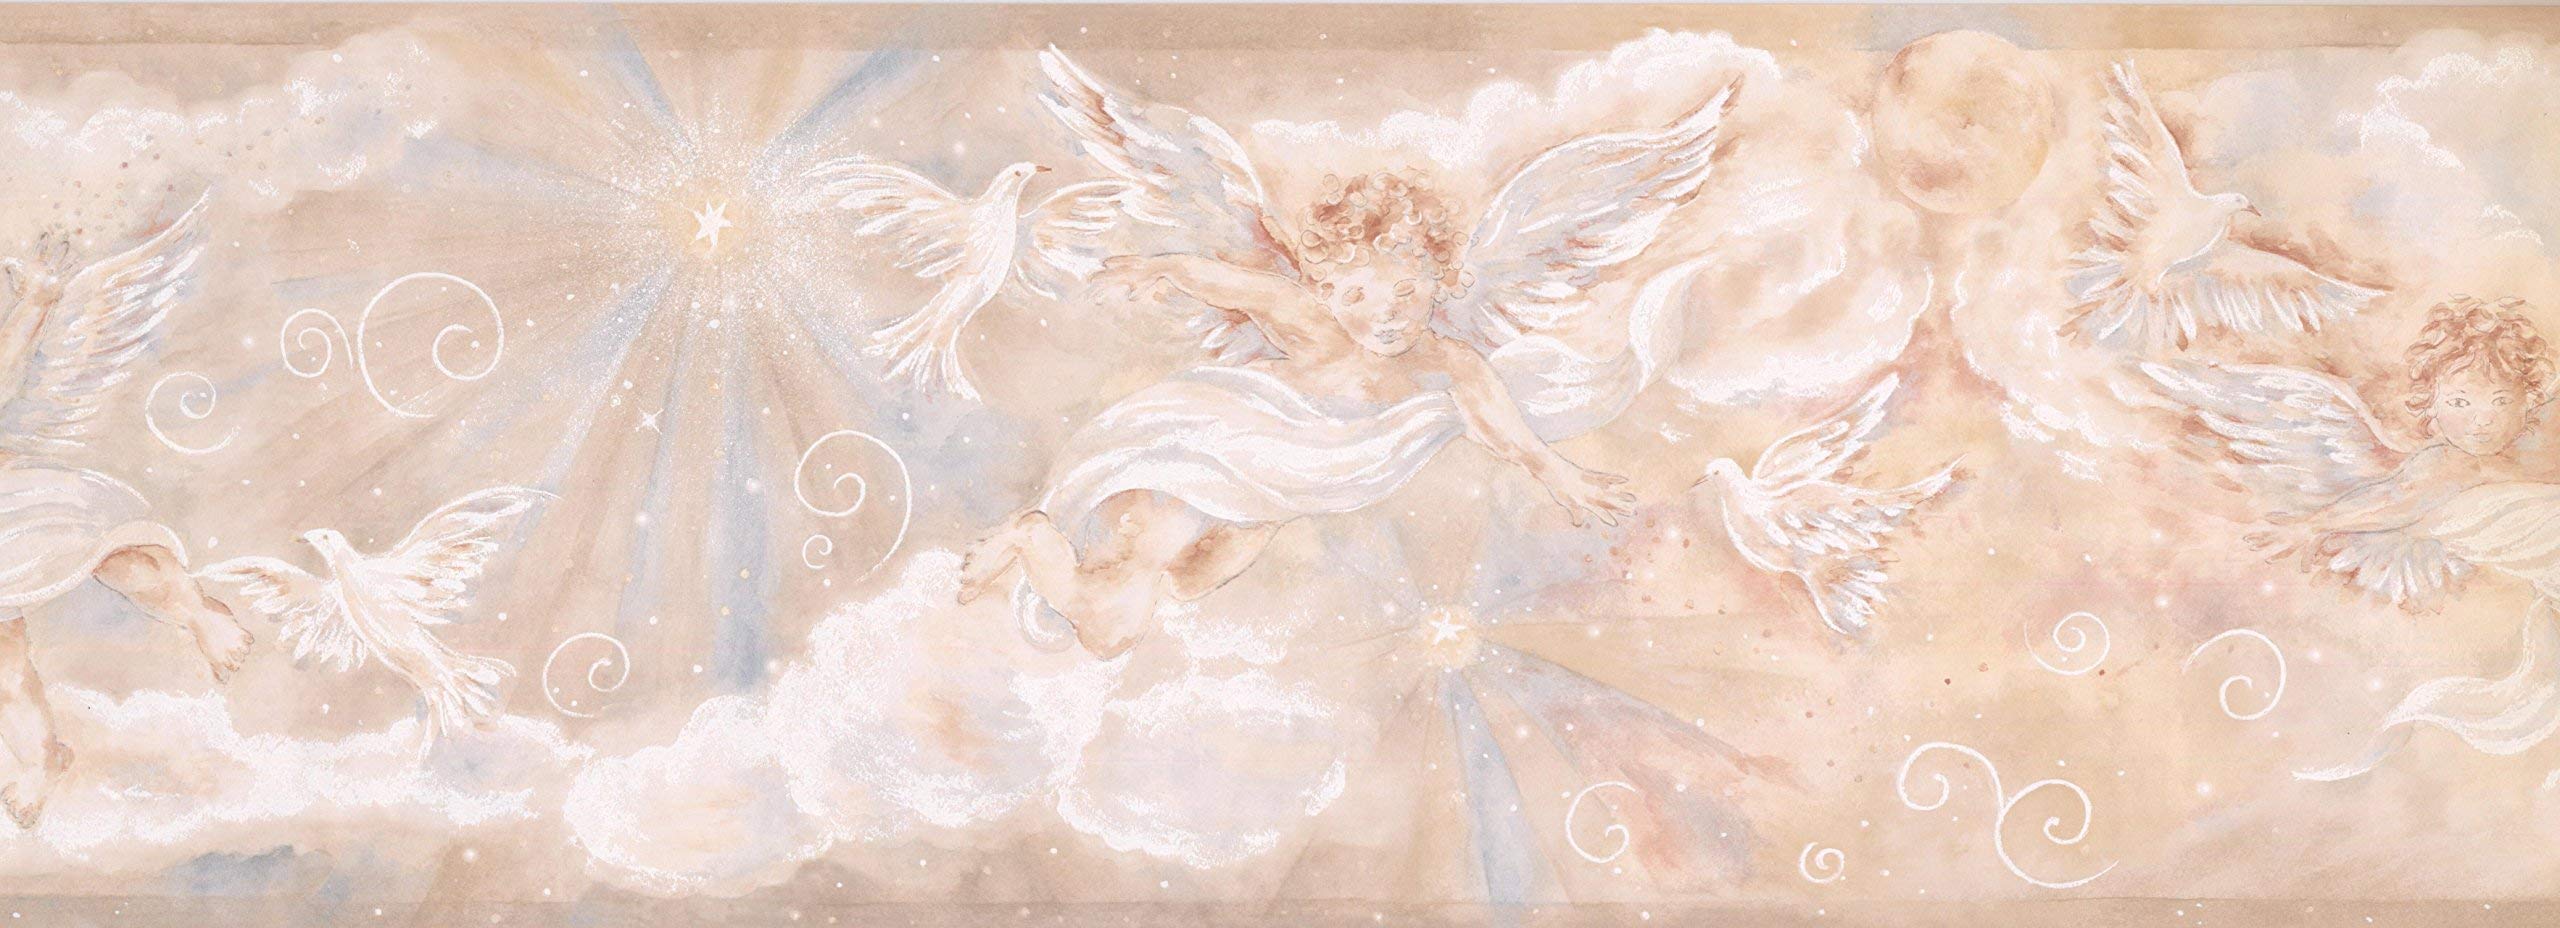 A watercolor painting of angels in the sky - Cupid